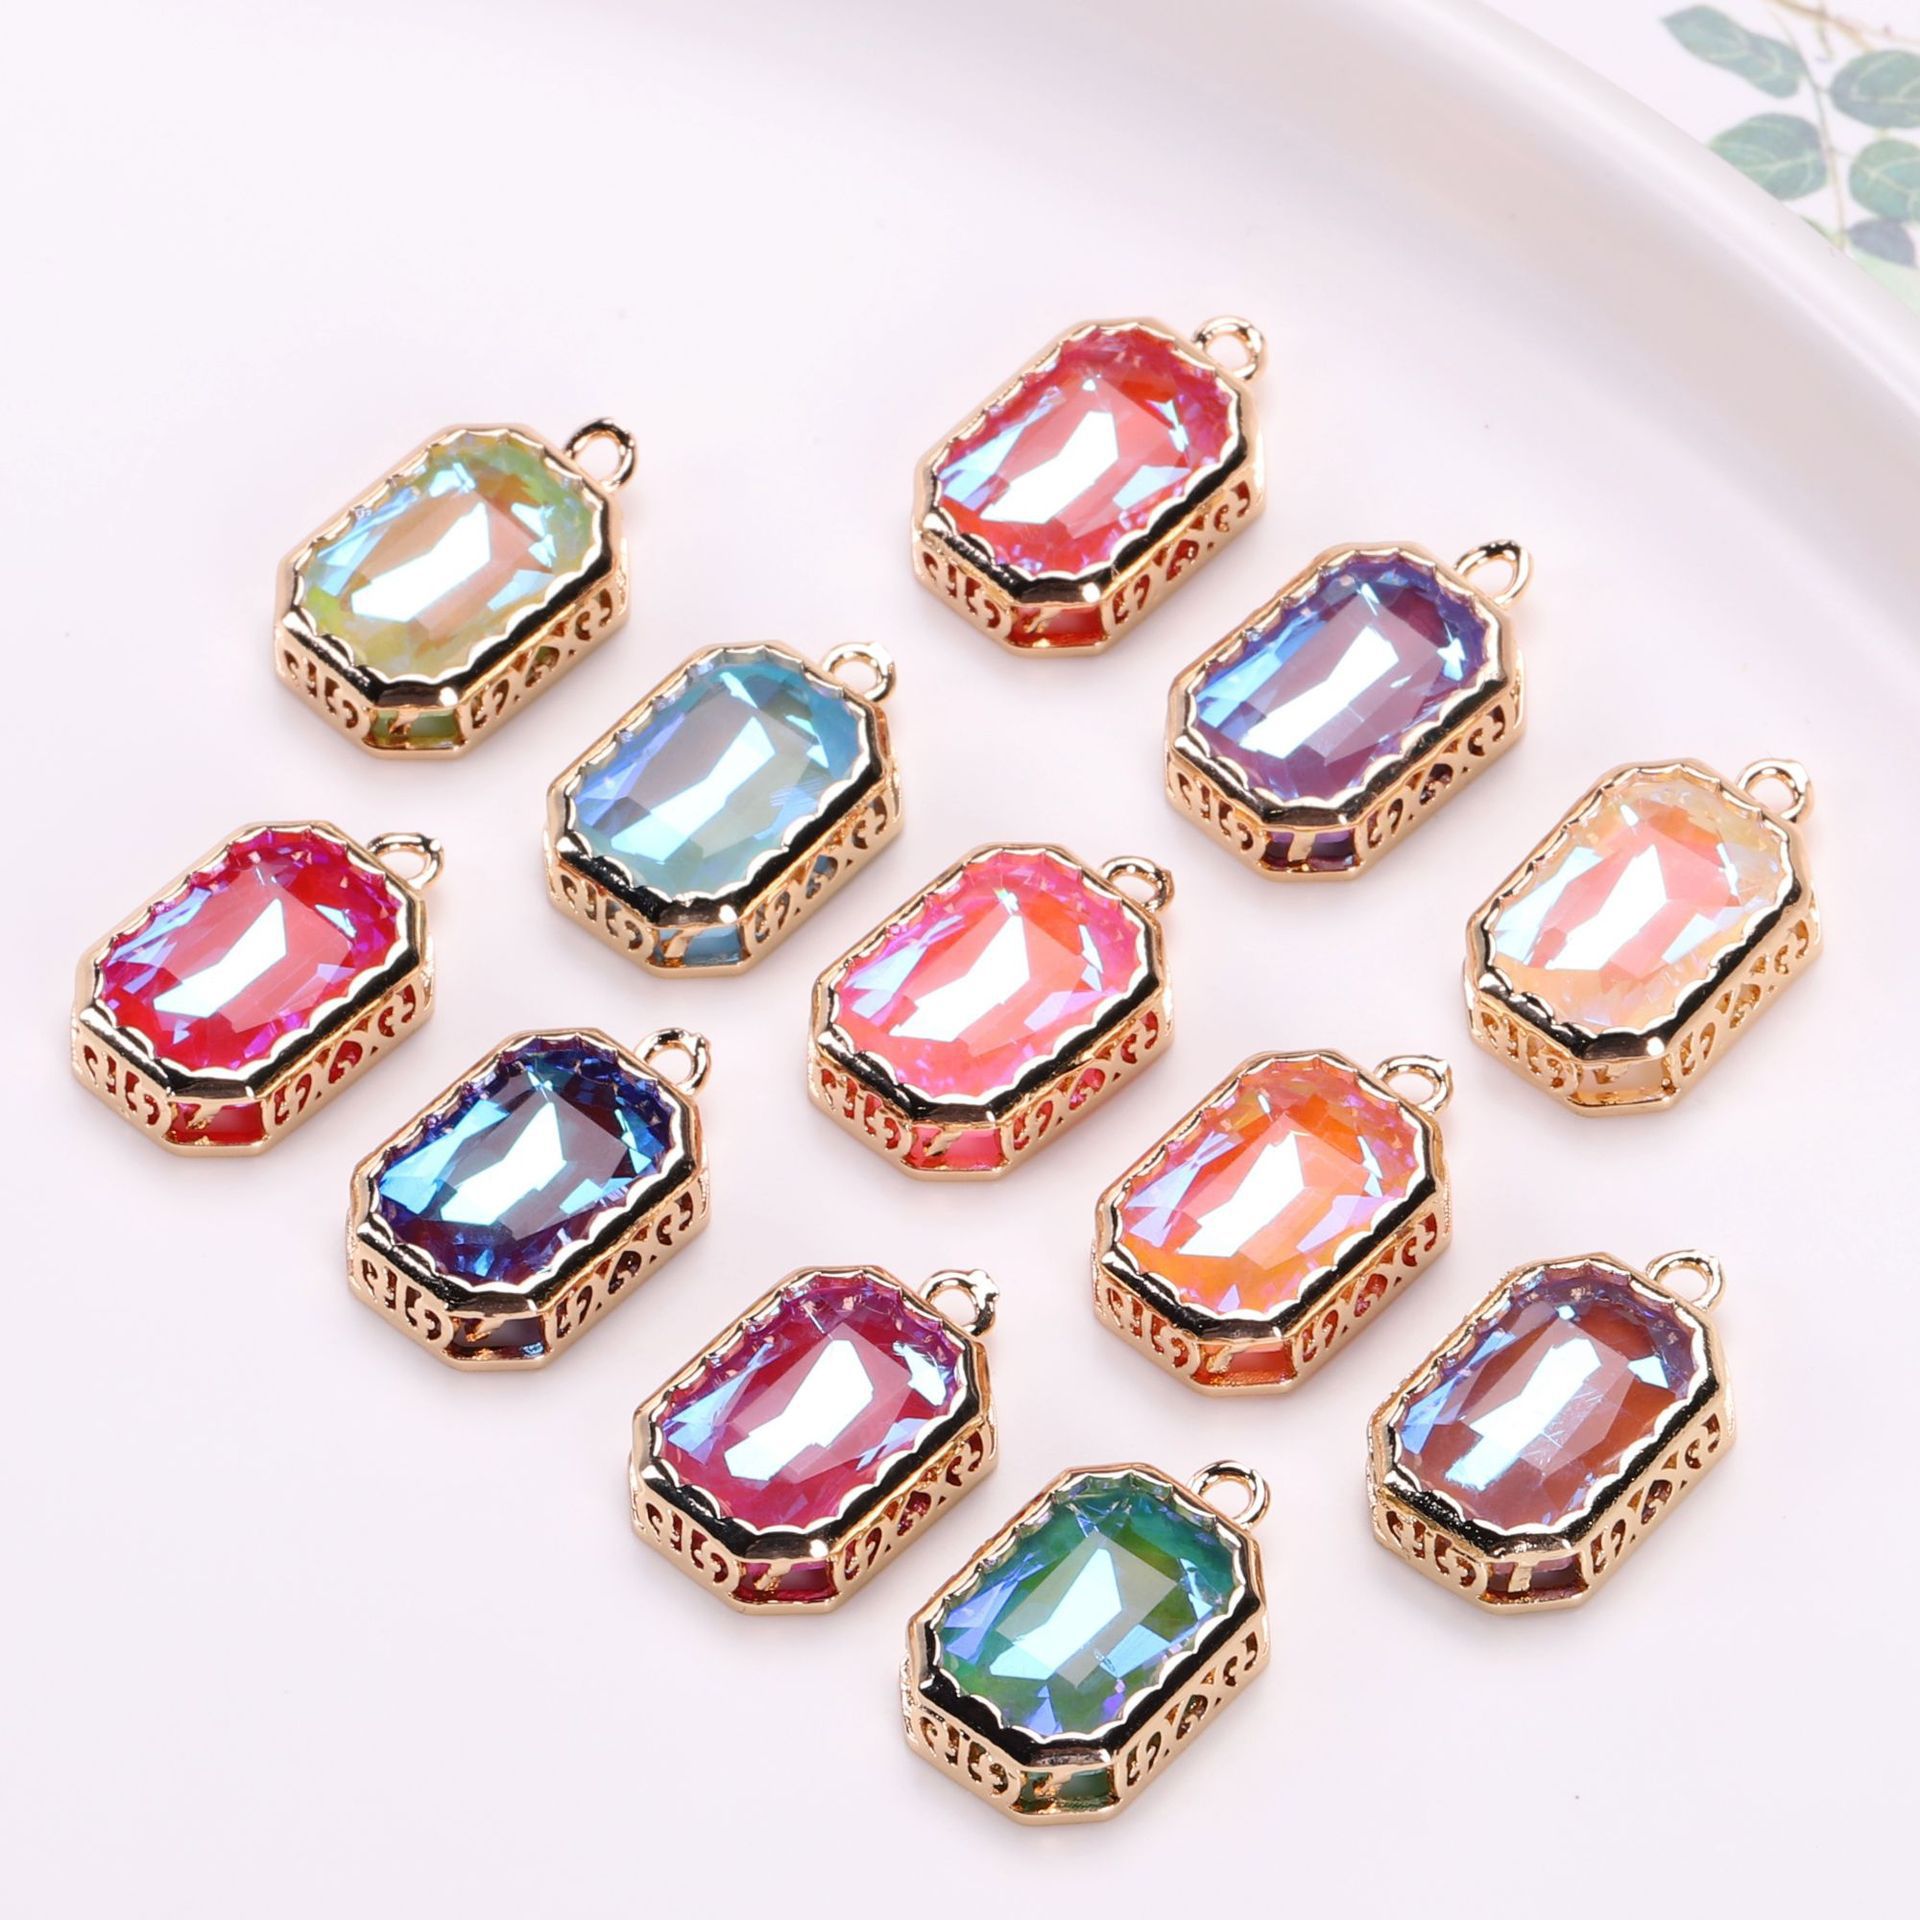 colorful bird‘s nest mocha square pendant diy ornament accessories lace crystal necklace earrings hair clasp handmade material